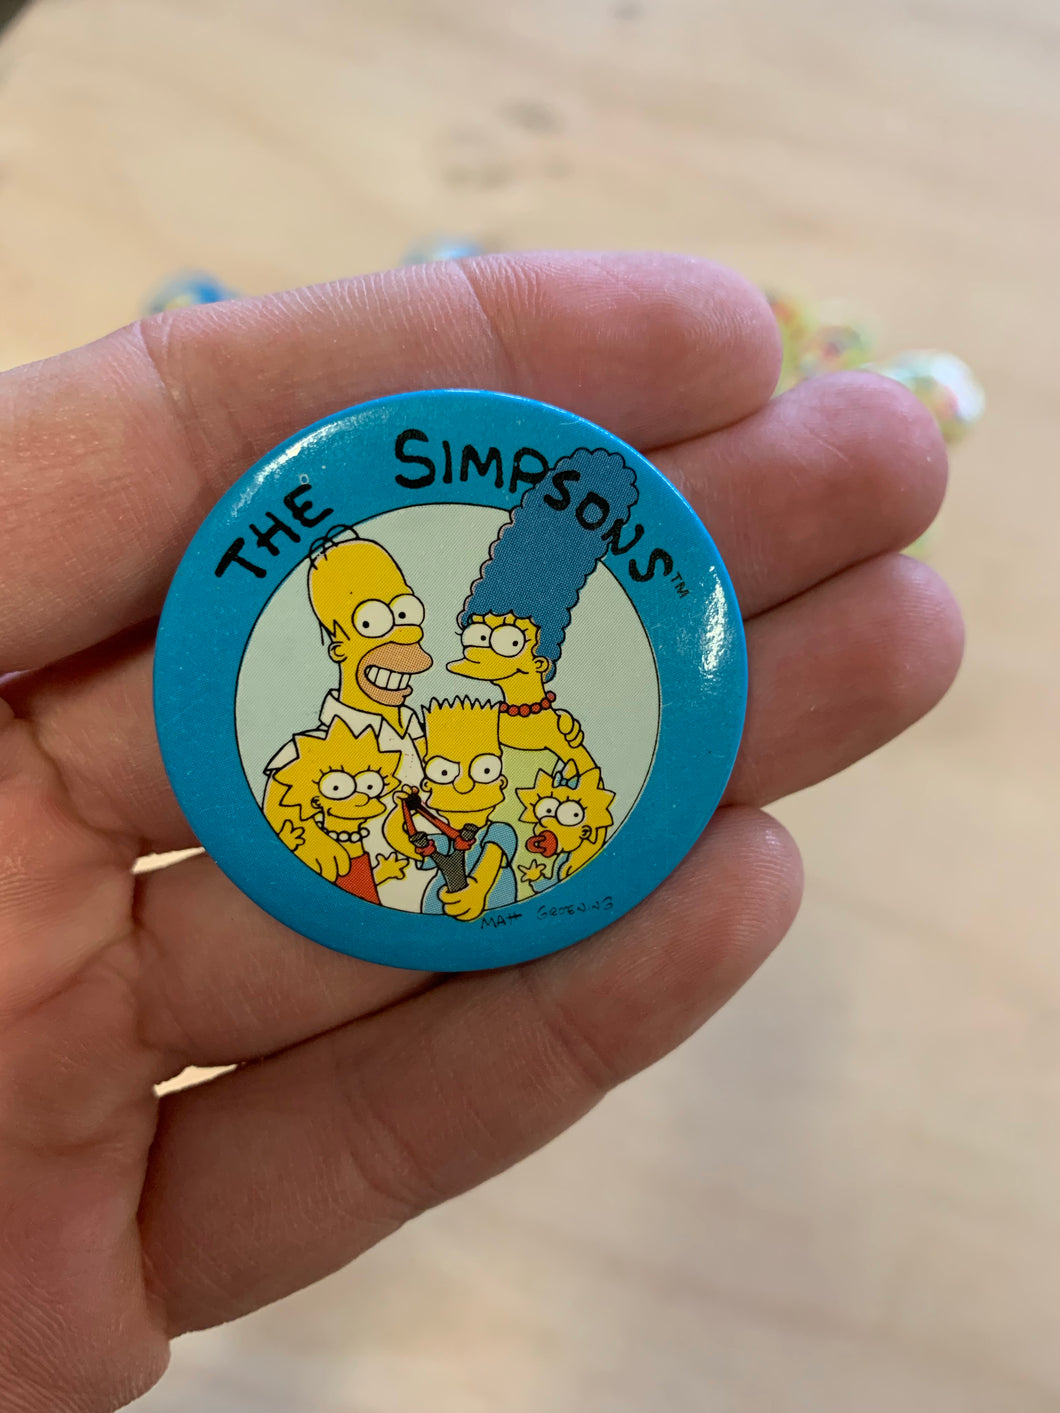 The Simpsons Family Blue Button